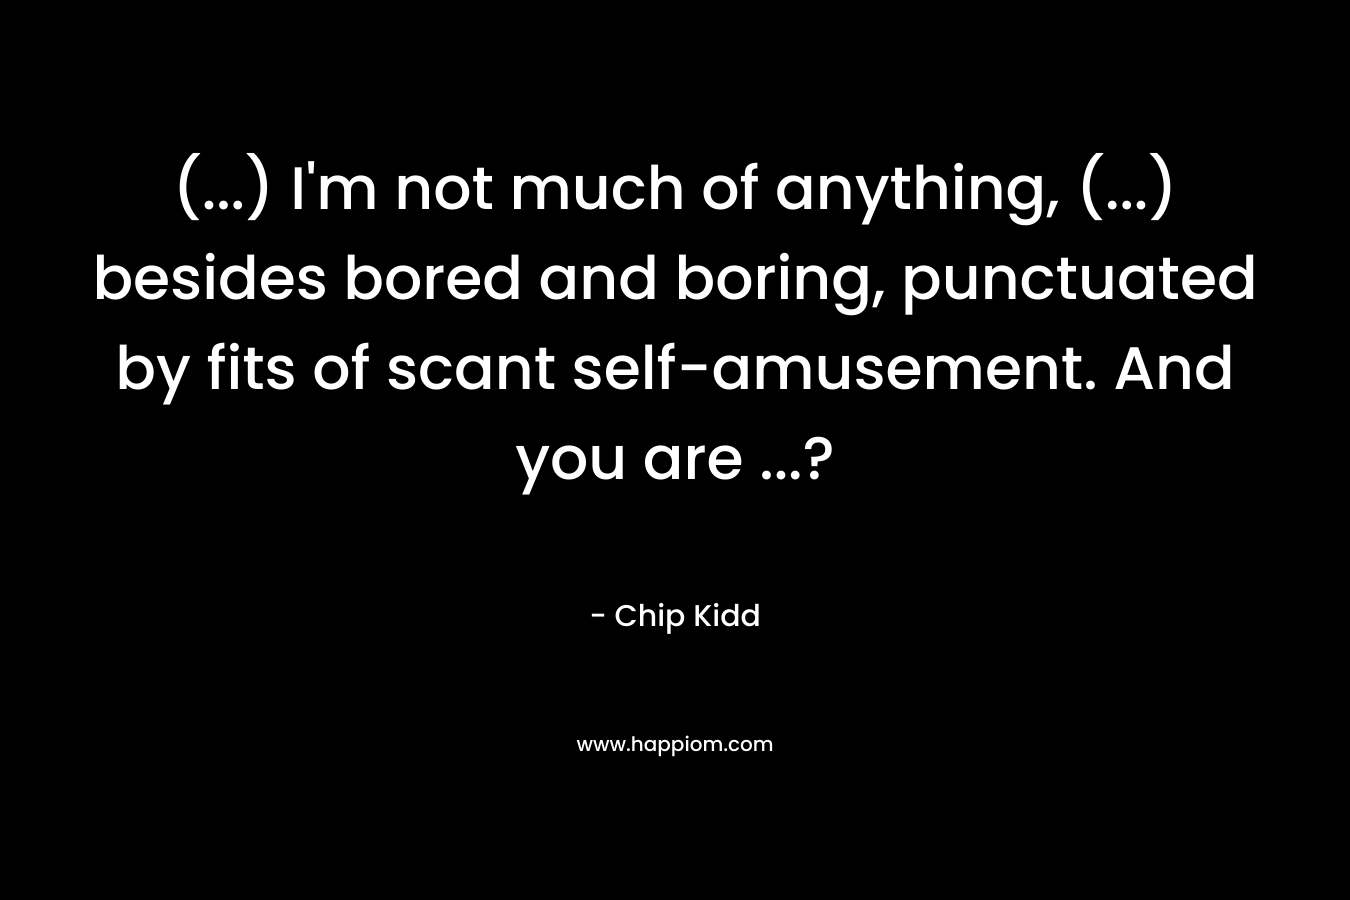 (…) I’m not much of anything, (…) besides bored and boring, punctuated by fits of scant self-amusement. And you are …? – Chip Kidd